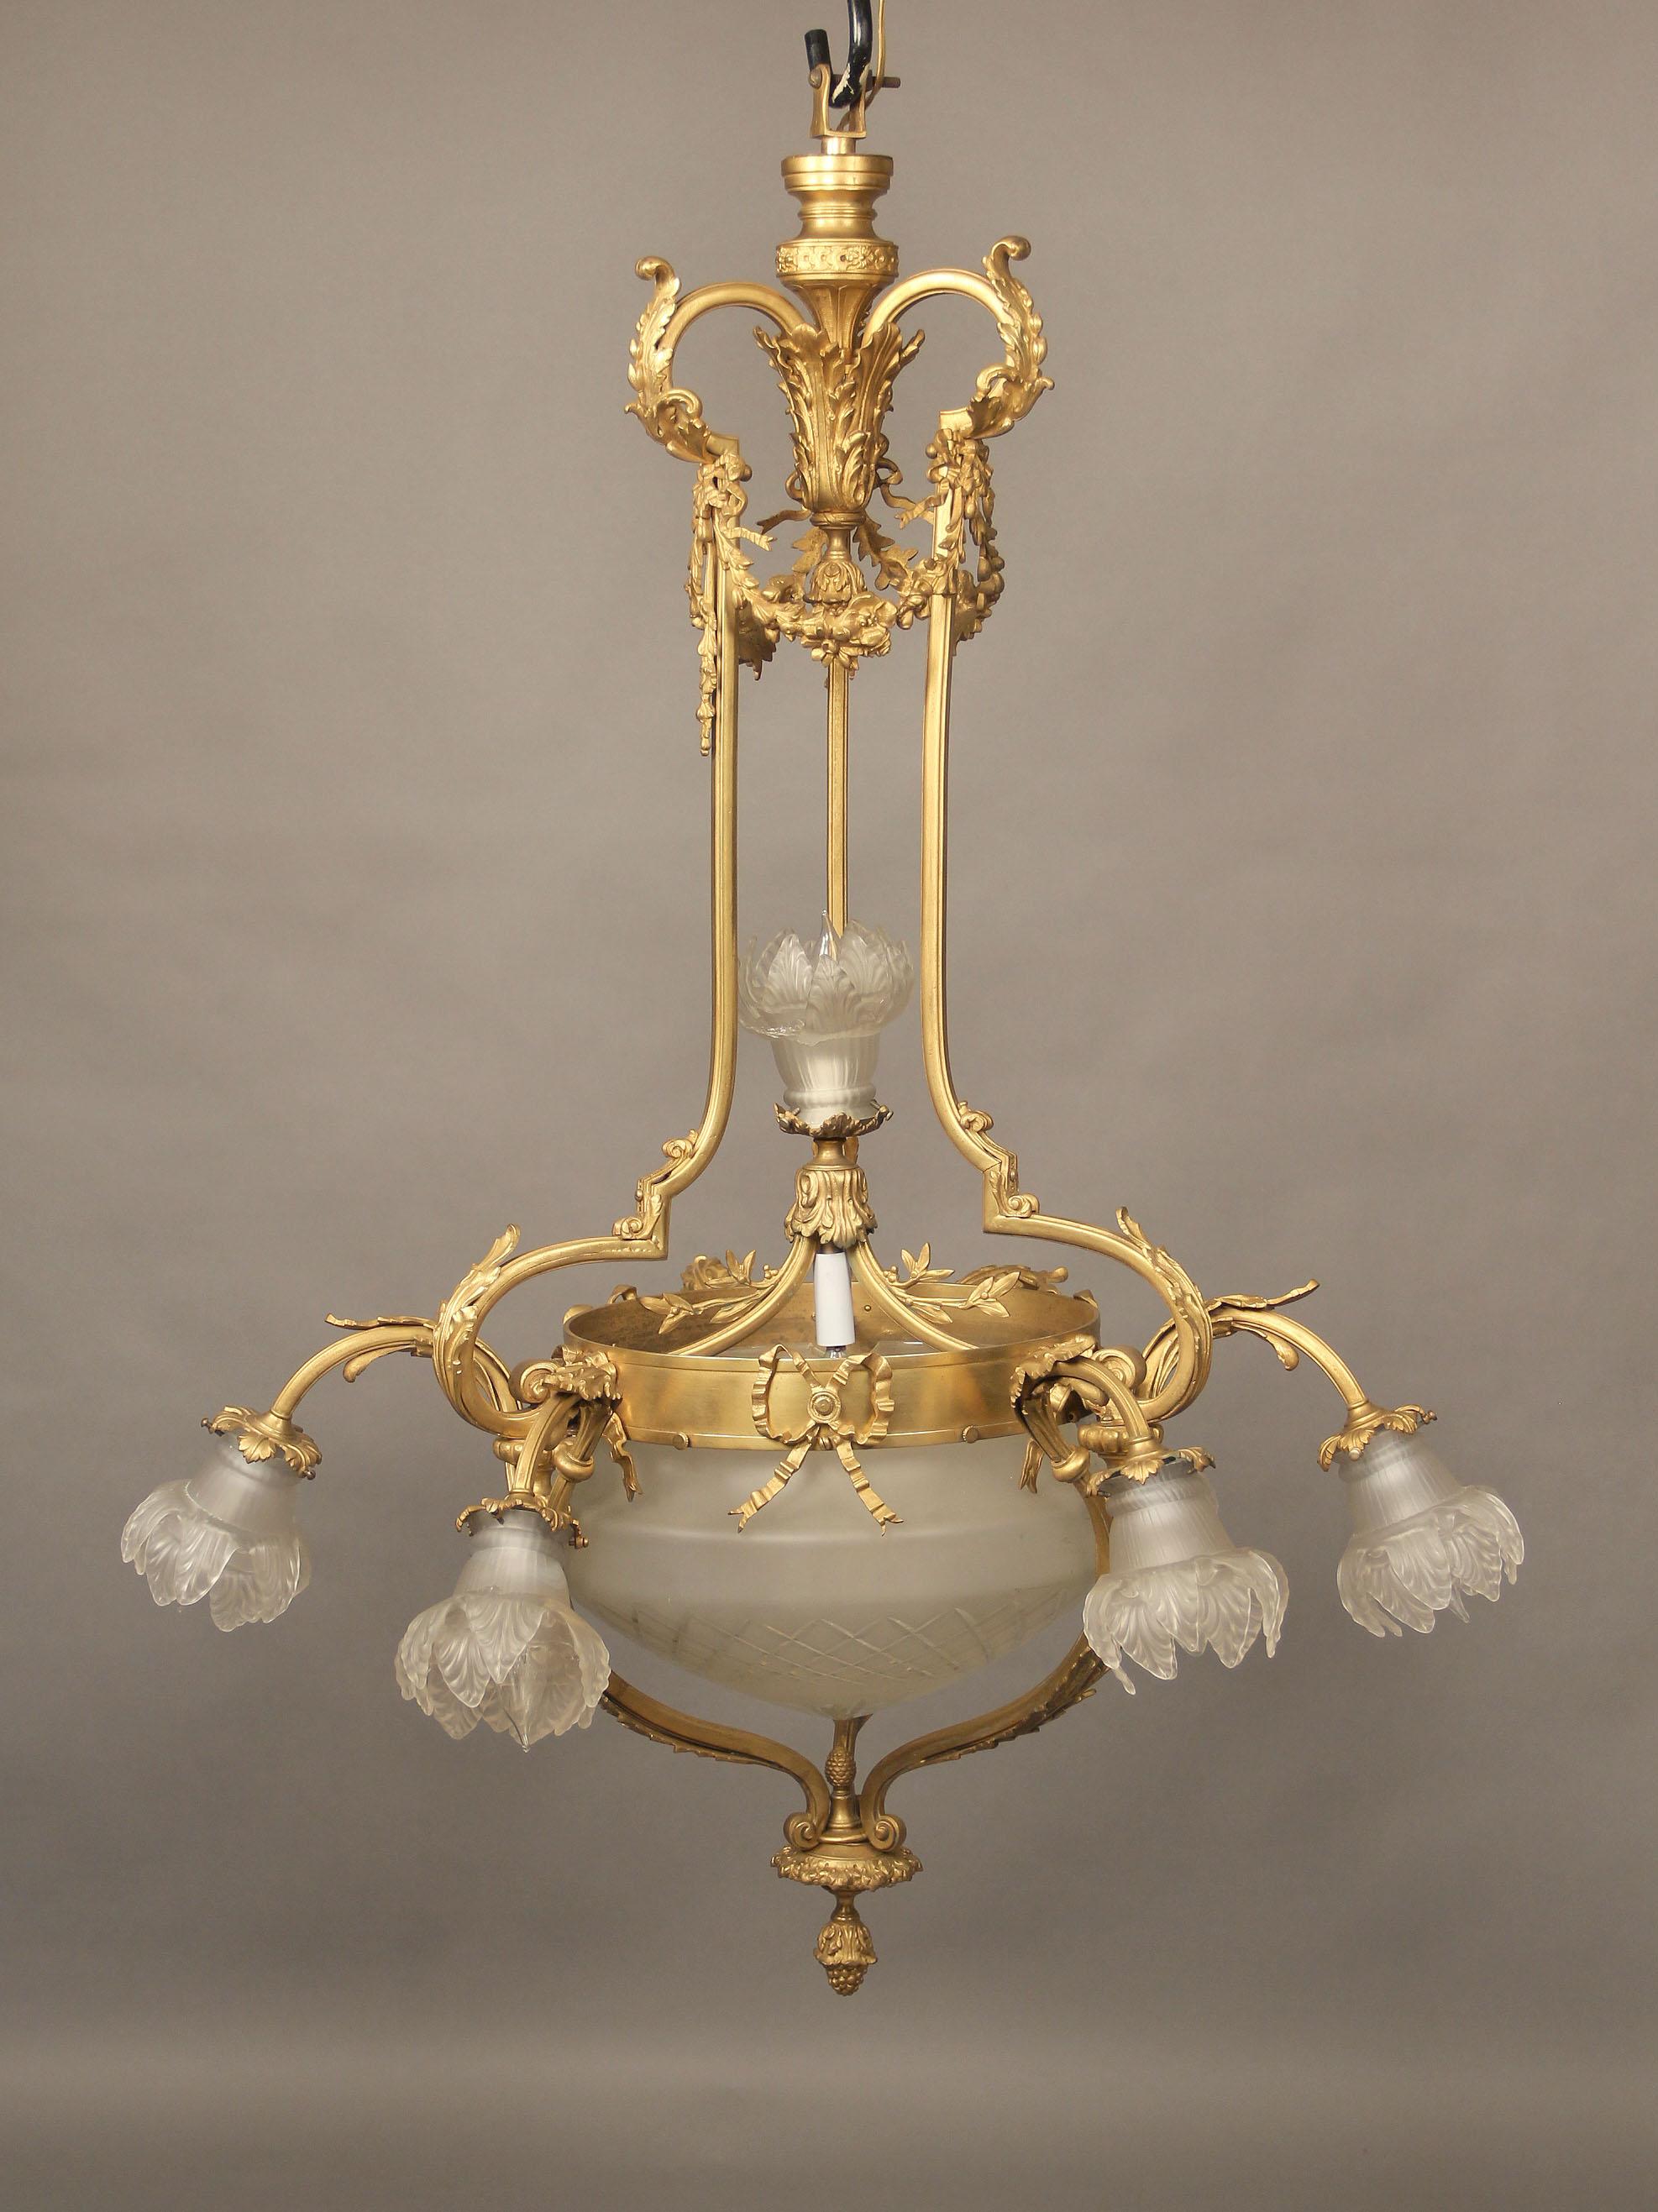 A lovely early 20th century gilt bronze eight-light chandelier

A gilt bronze frame with casted scrolled arms extending to six perimeter lights with rose shades, the bottom centered with crystal bowl. The top with bronze flowers and bows. Two